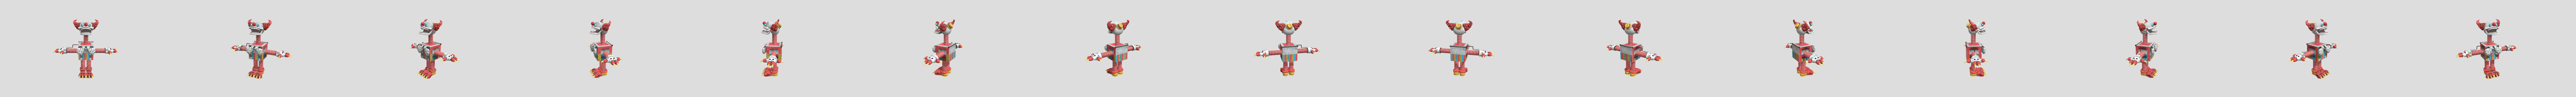 Clown Boxy Project:Playtime Phase 2 - Download Free 3D model by